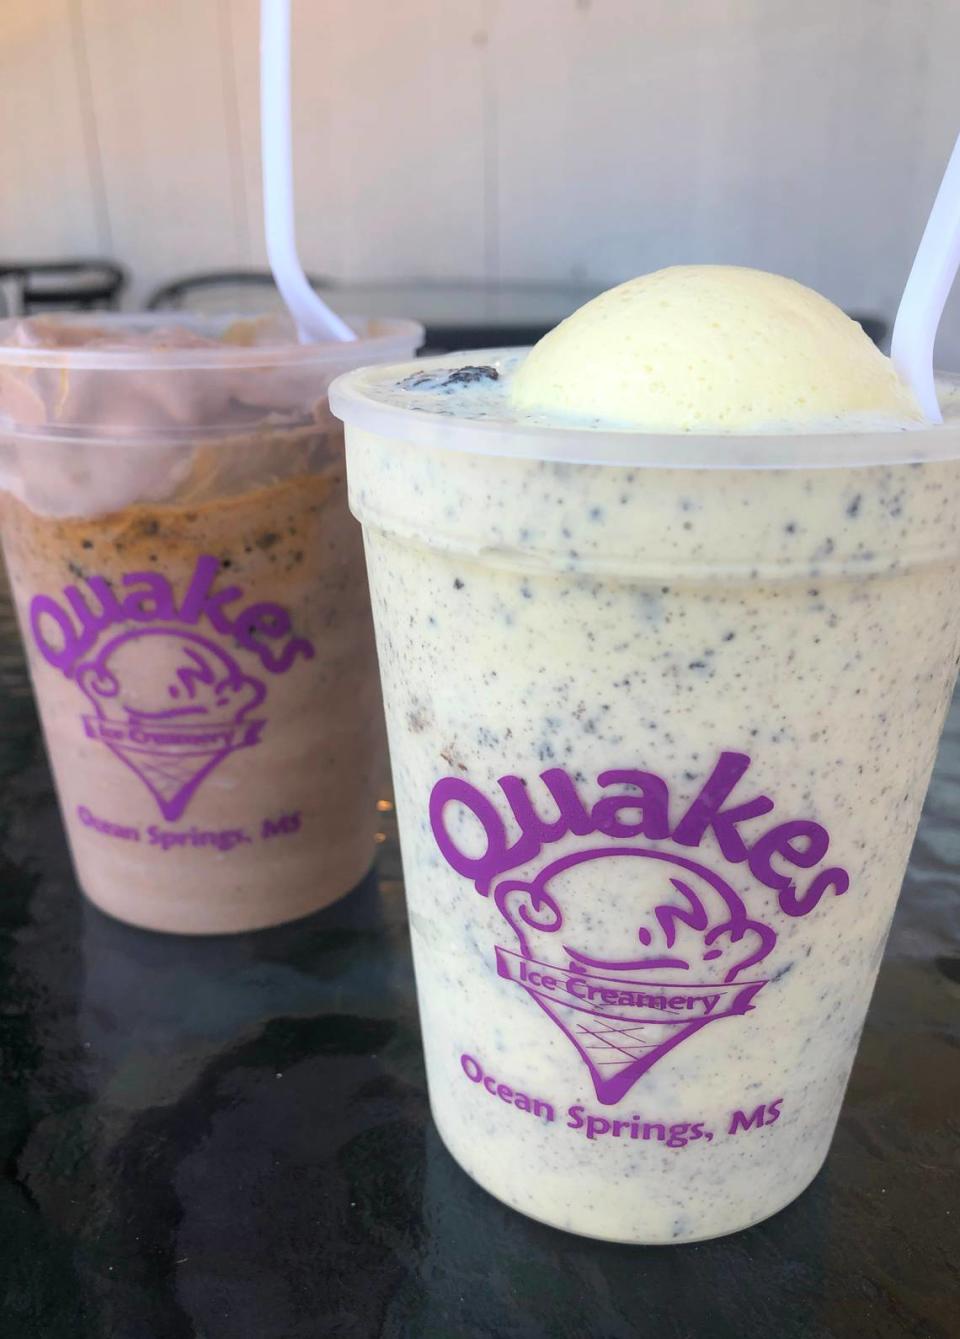 The Cookie Crumble and Mississippi Mud Pie specialty quakes at Quakes Ice Creamery in Ocean Springs on Thursday, Aug. 17, 2023. Hannah Ruhoff/Sun Herald